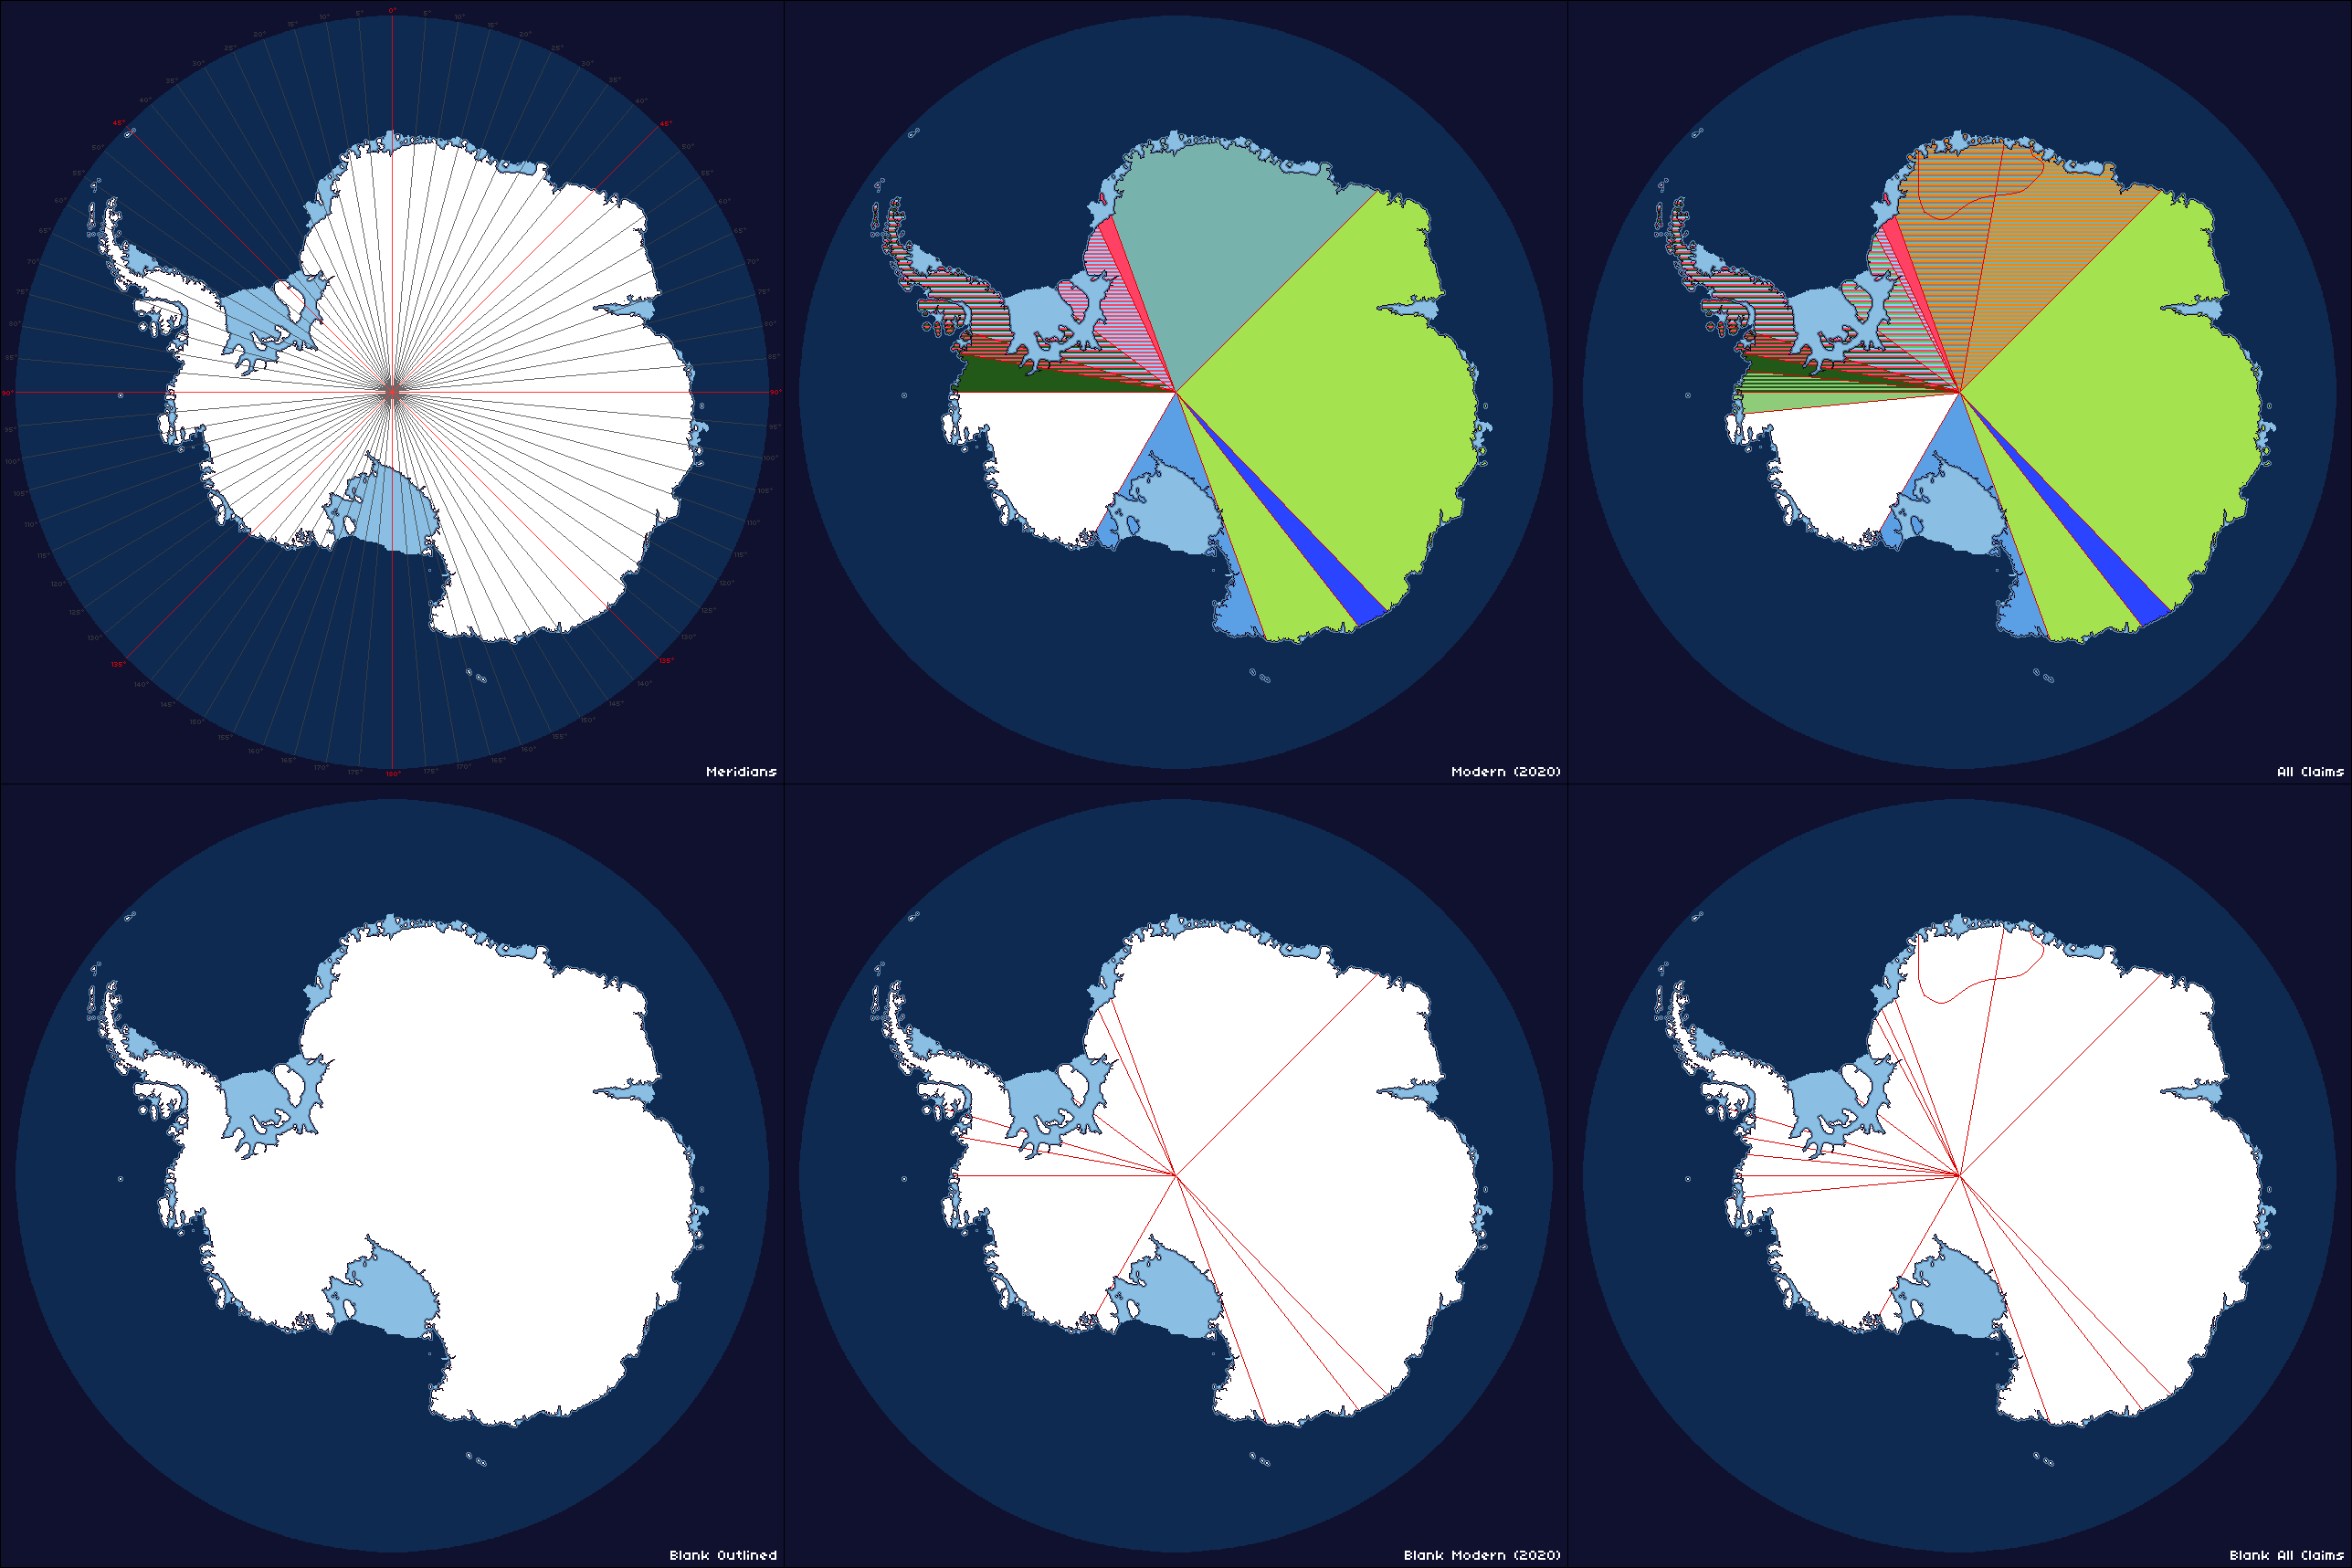 antarctica_spinv_patches.png